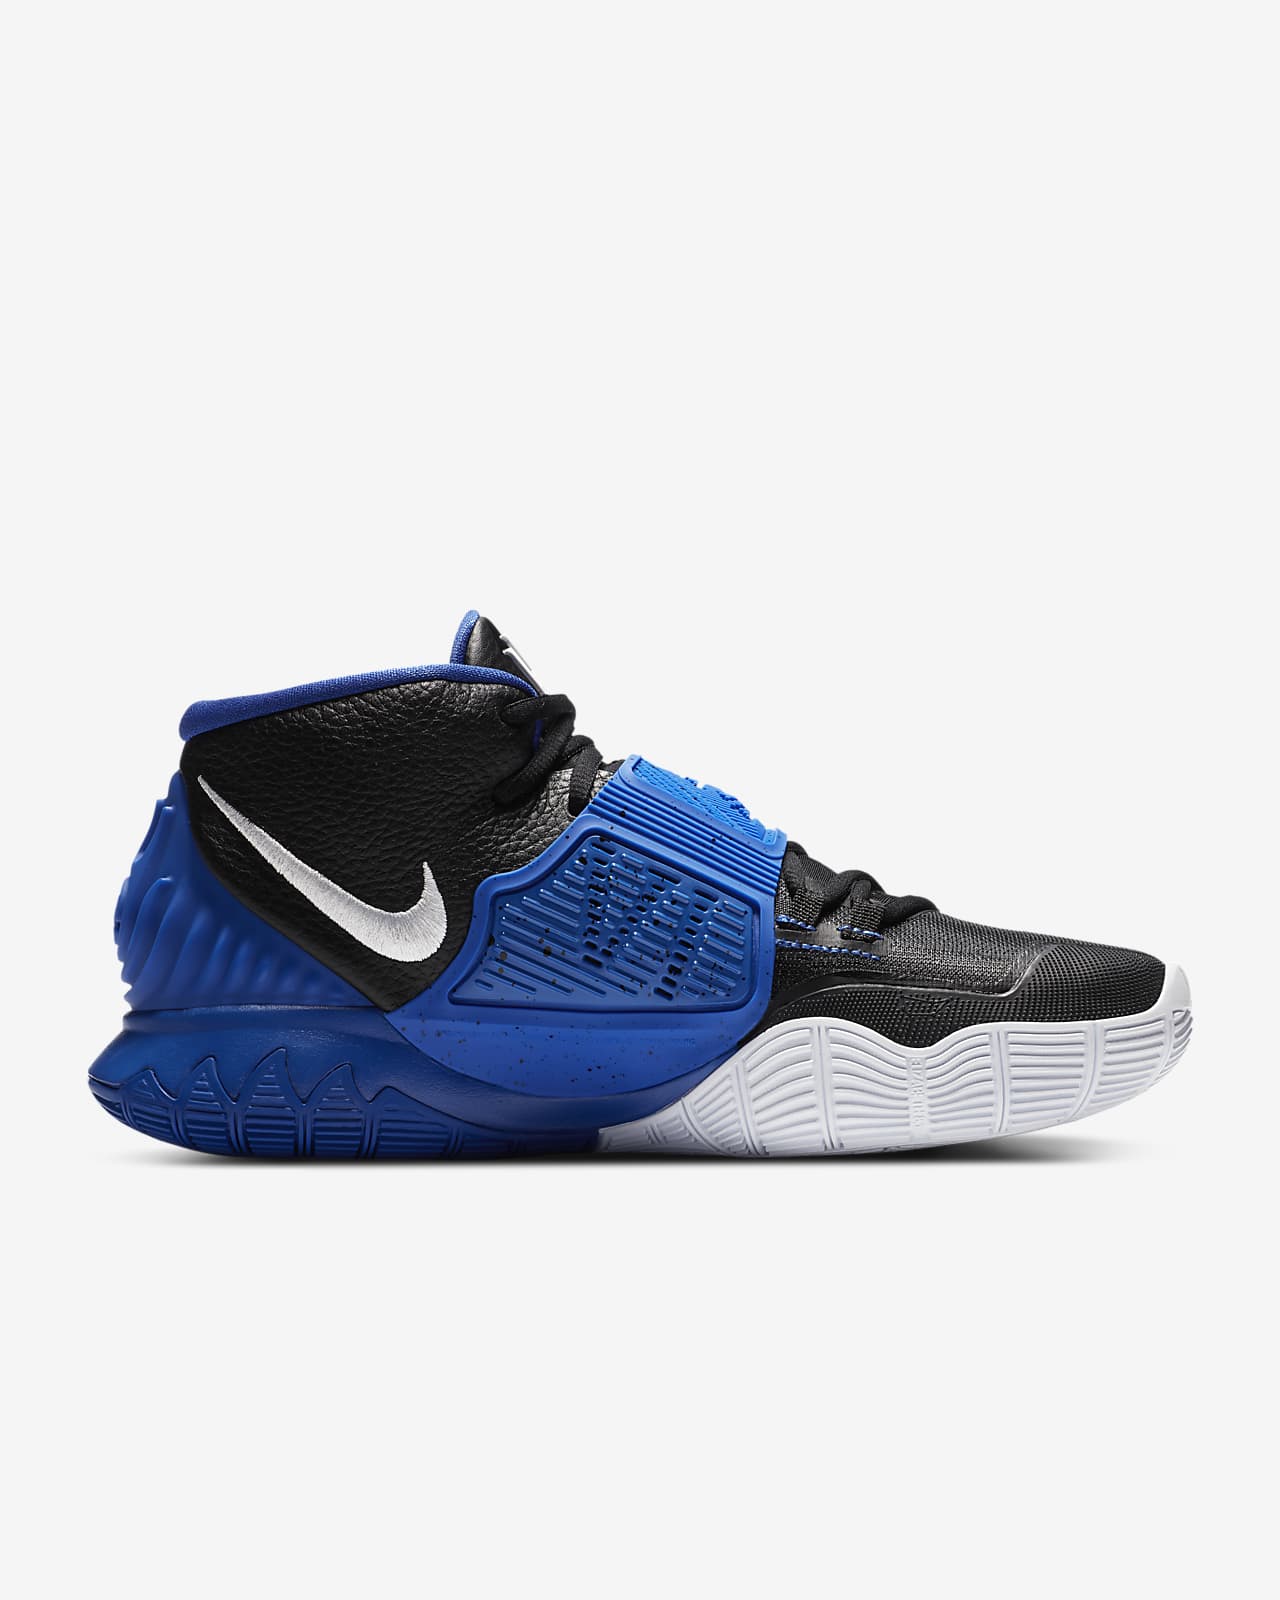 blue and white kyrie 6